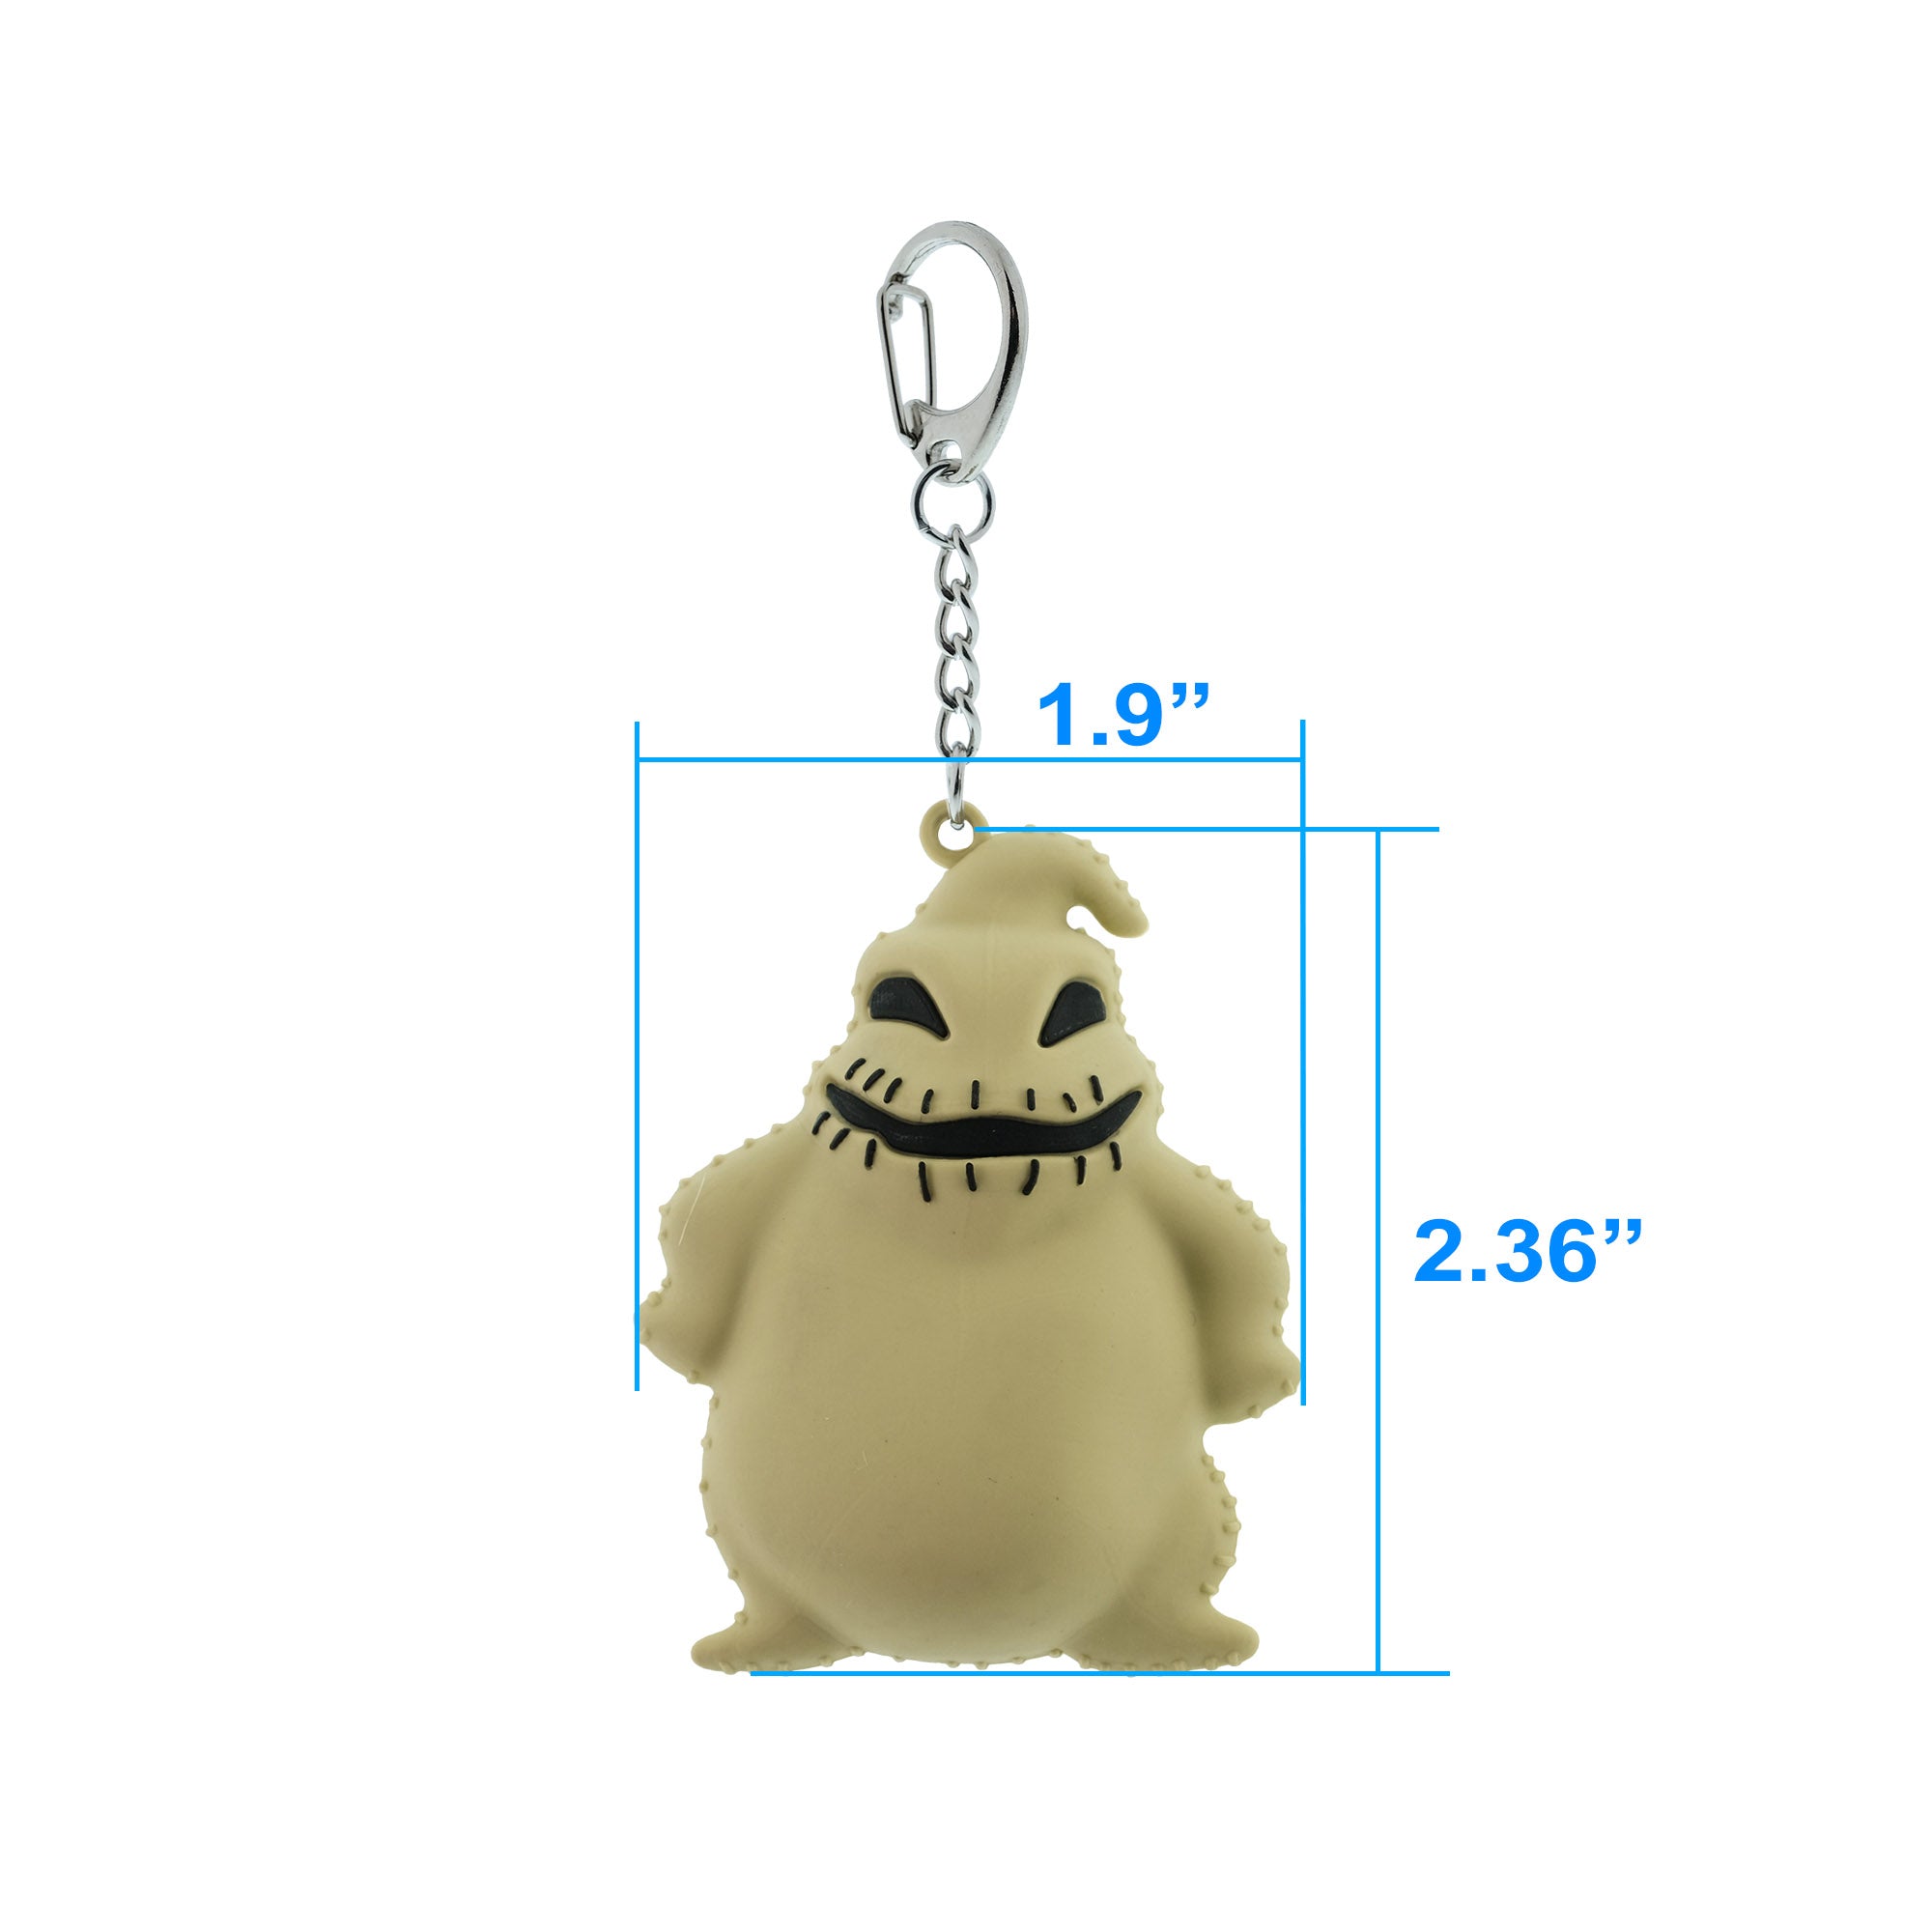 Top-selling Item] The Nightmare Before Christmas Movie Rubber